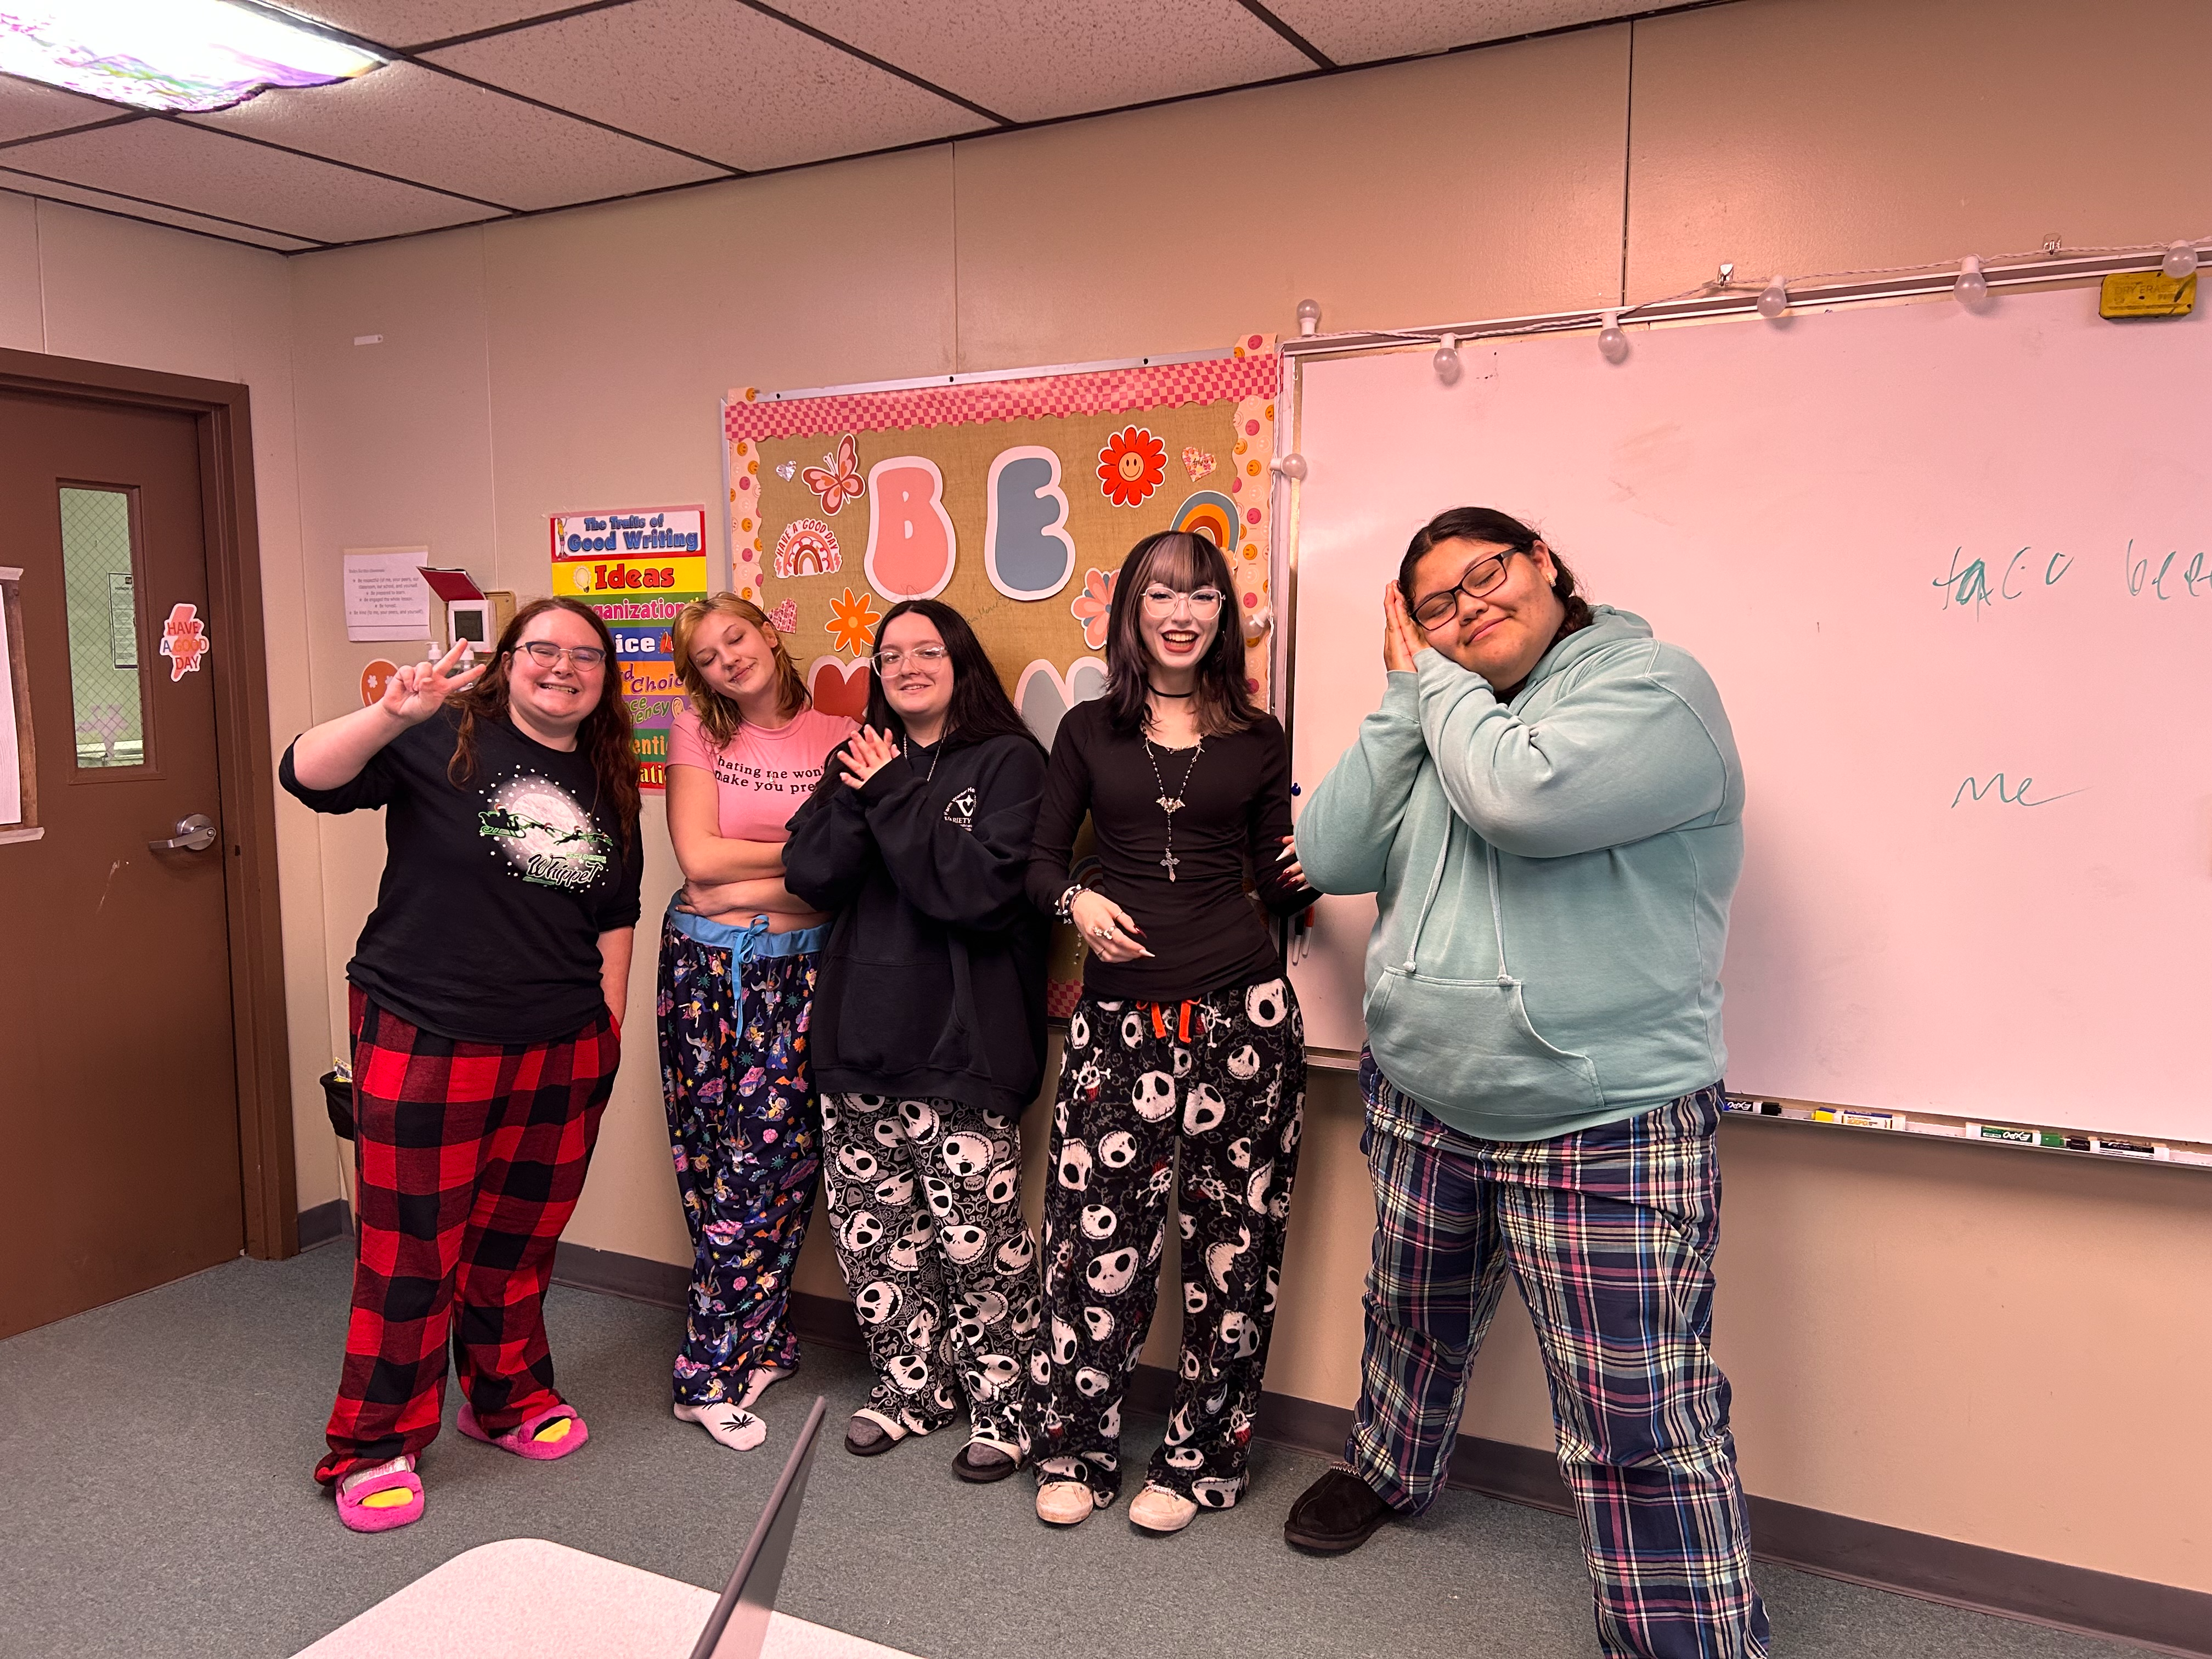 Several of the staff looking comfy for pajama day during Red Ribbon Week. Pictured from left to right Hanna Smith, Julieauan Marson, Calora Cain, Jadelan Cartwright, and Mvhayv Salceda.